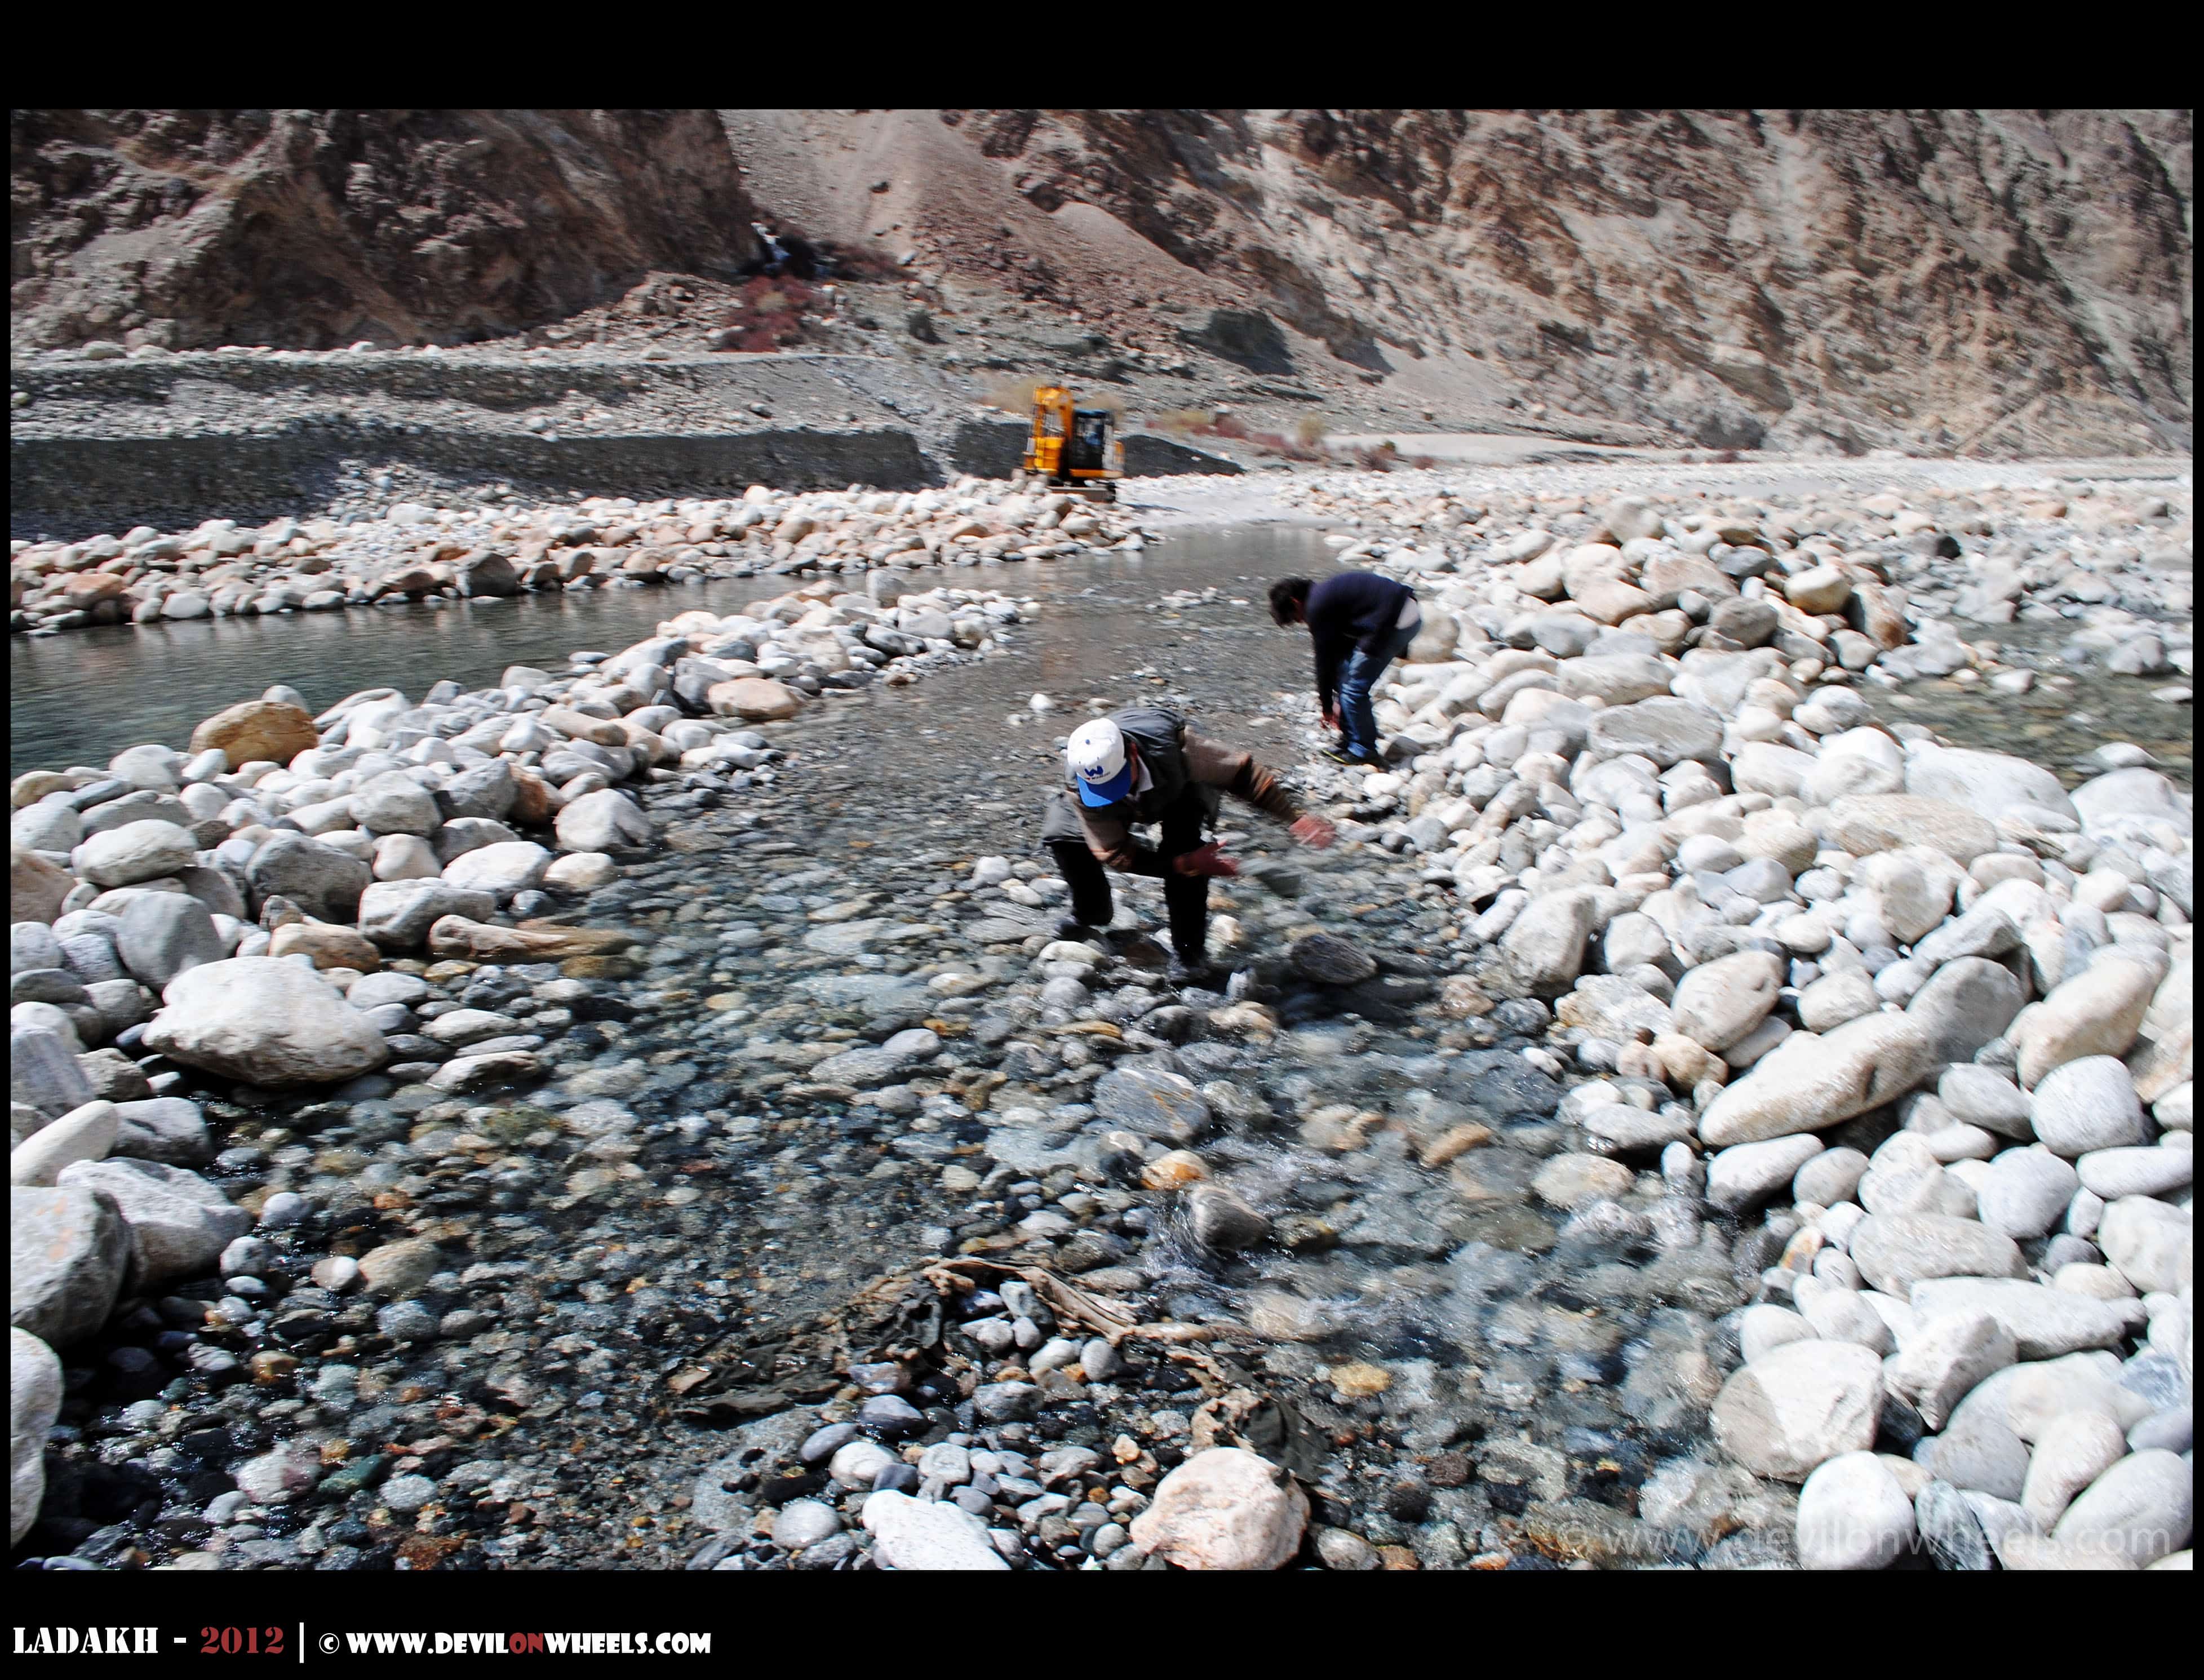 Yes, I know - Traveling to Ladakh ain't that easy as it looks..